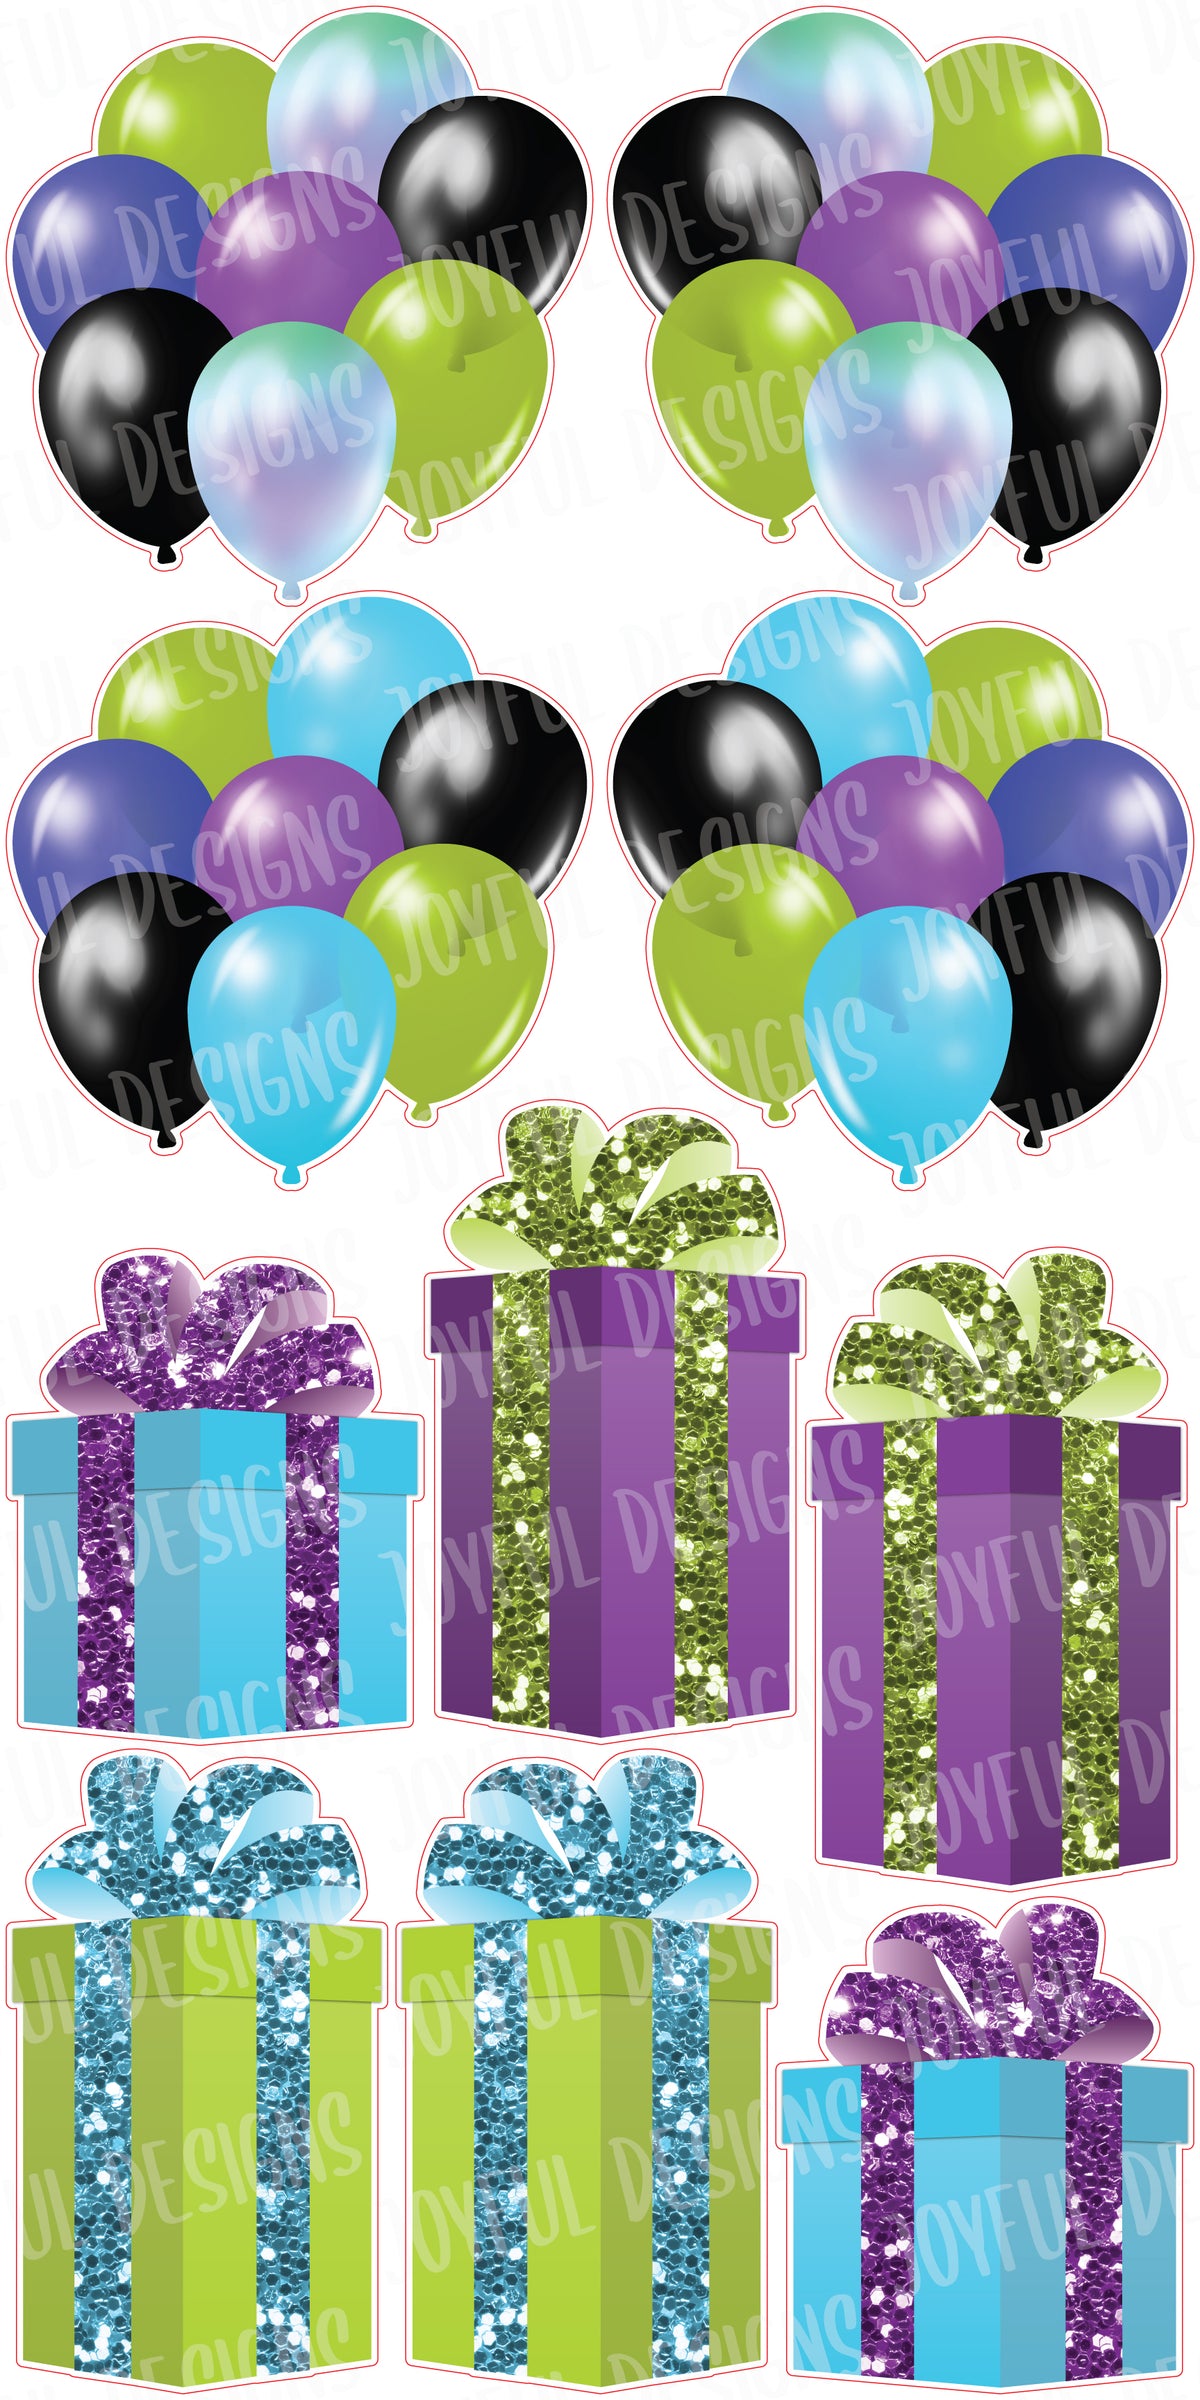 NEON Balloons and Gifts